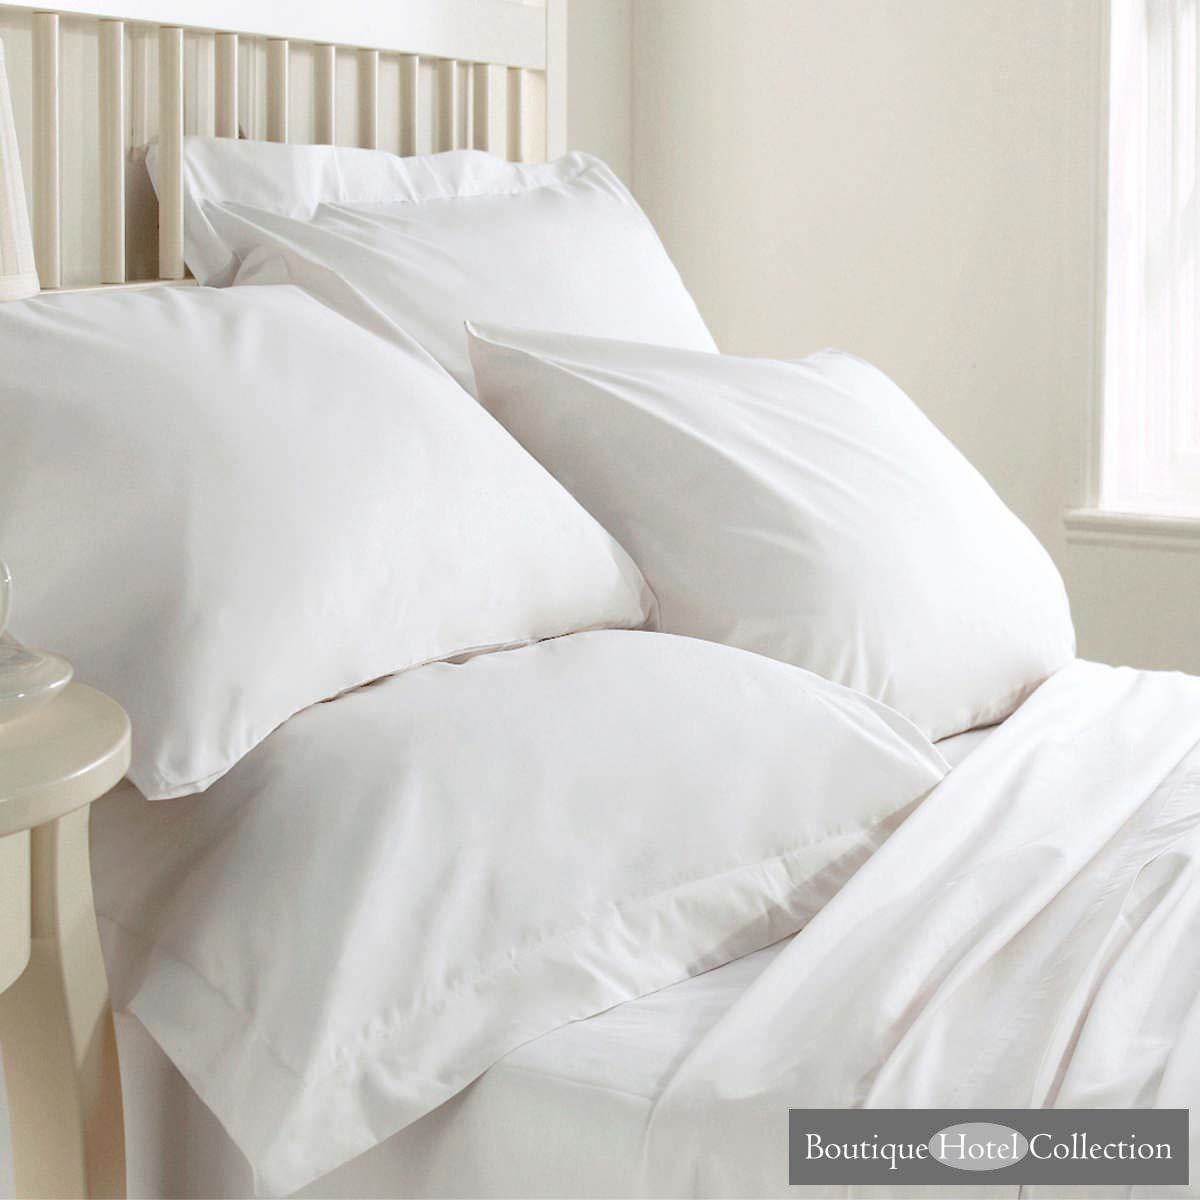 Boutique Hotel Collection 800 Thread Count 6 Piece Bedding Set